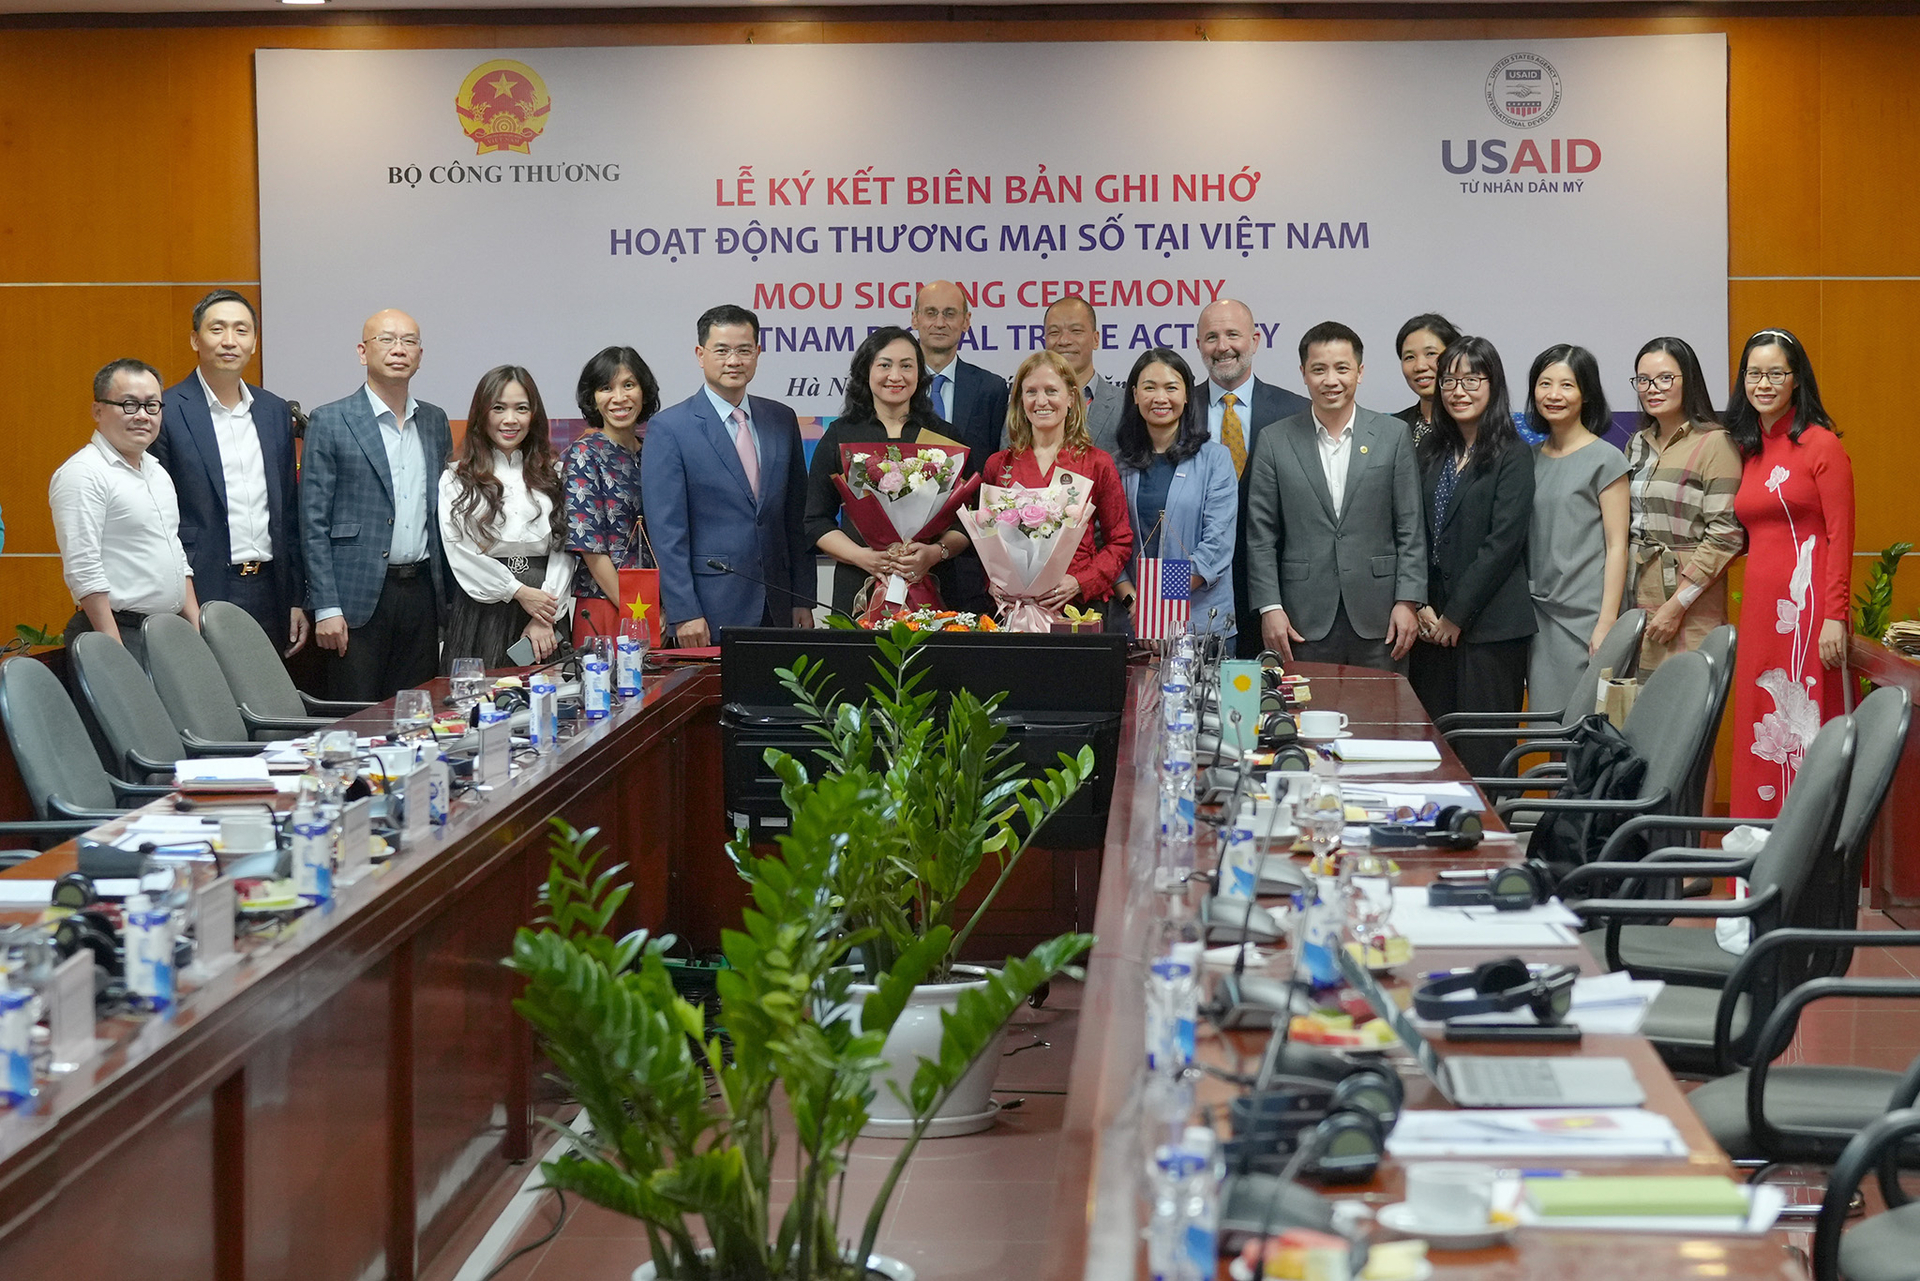 Signing ceremony on October 13 between the US and the Ministry of Industry and Trade. Photo: U.S Embassy.